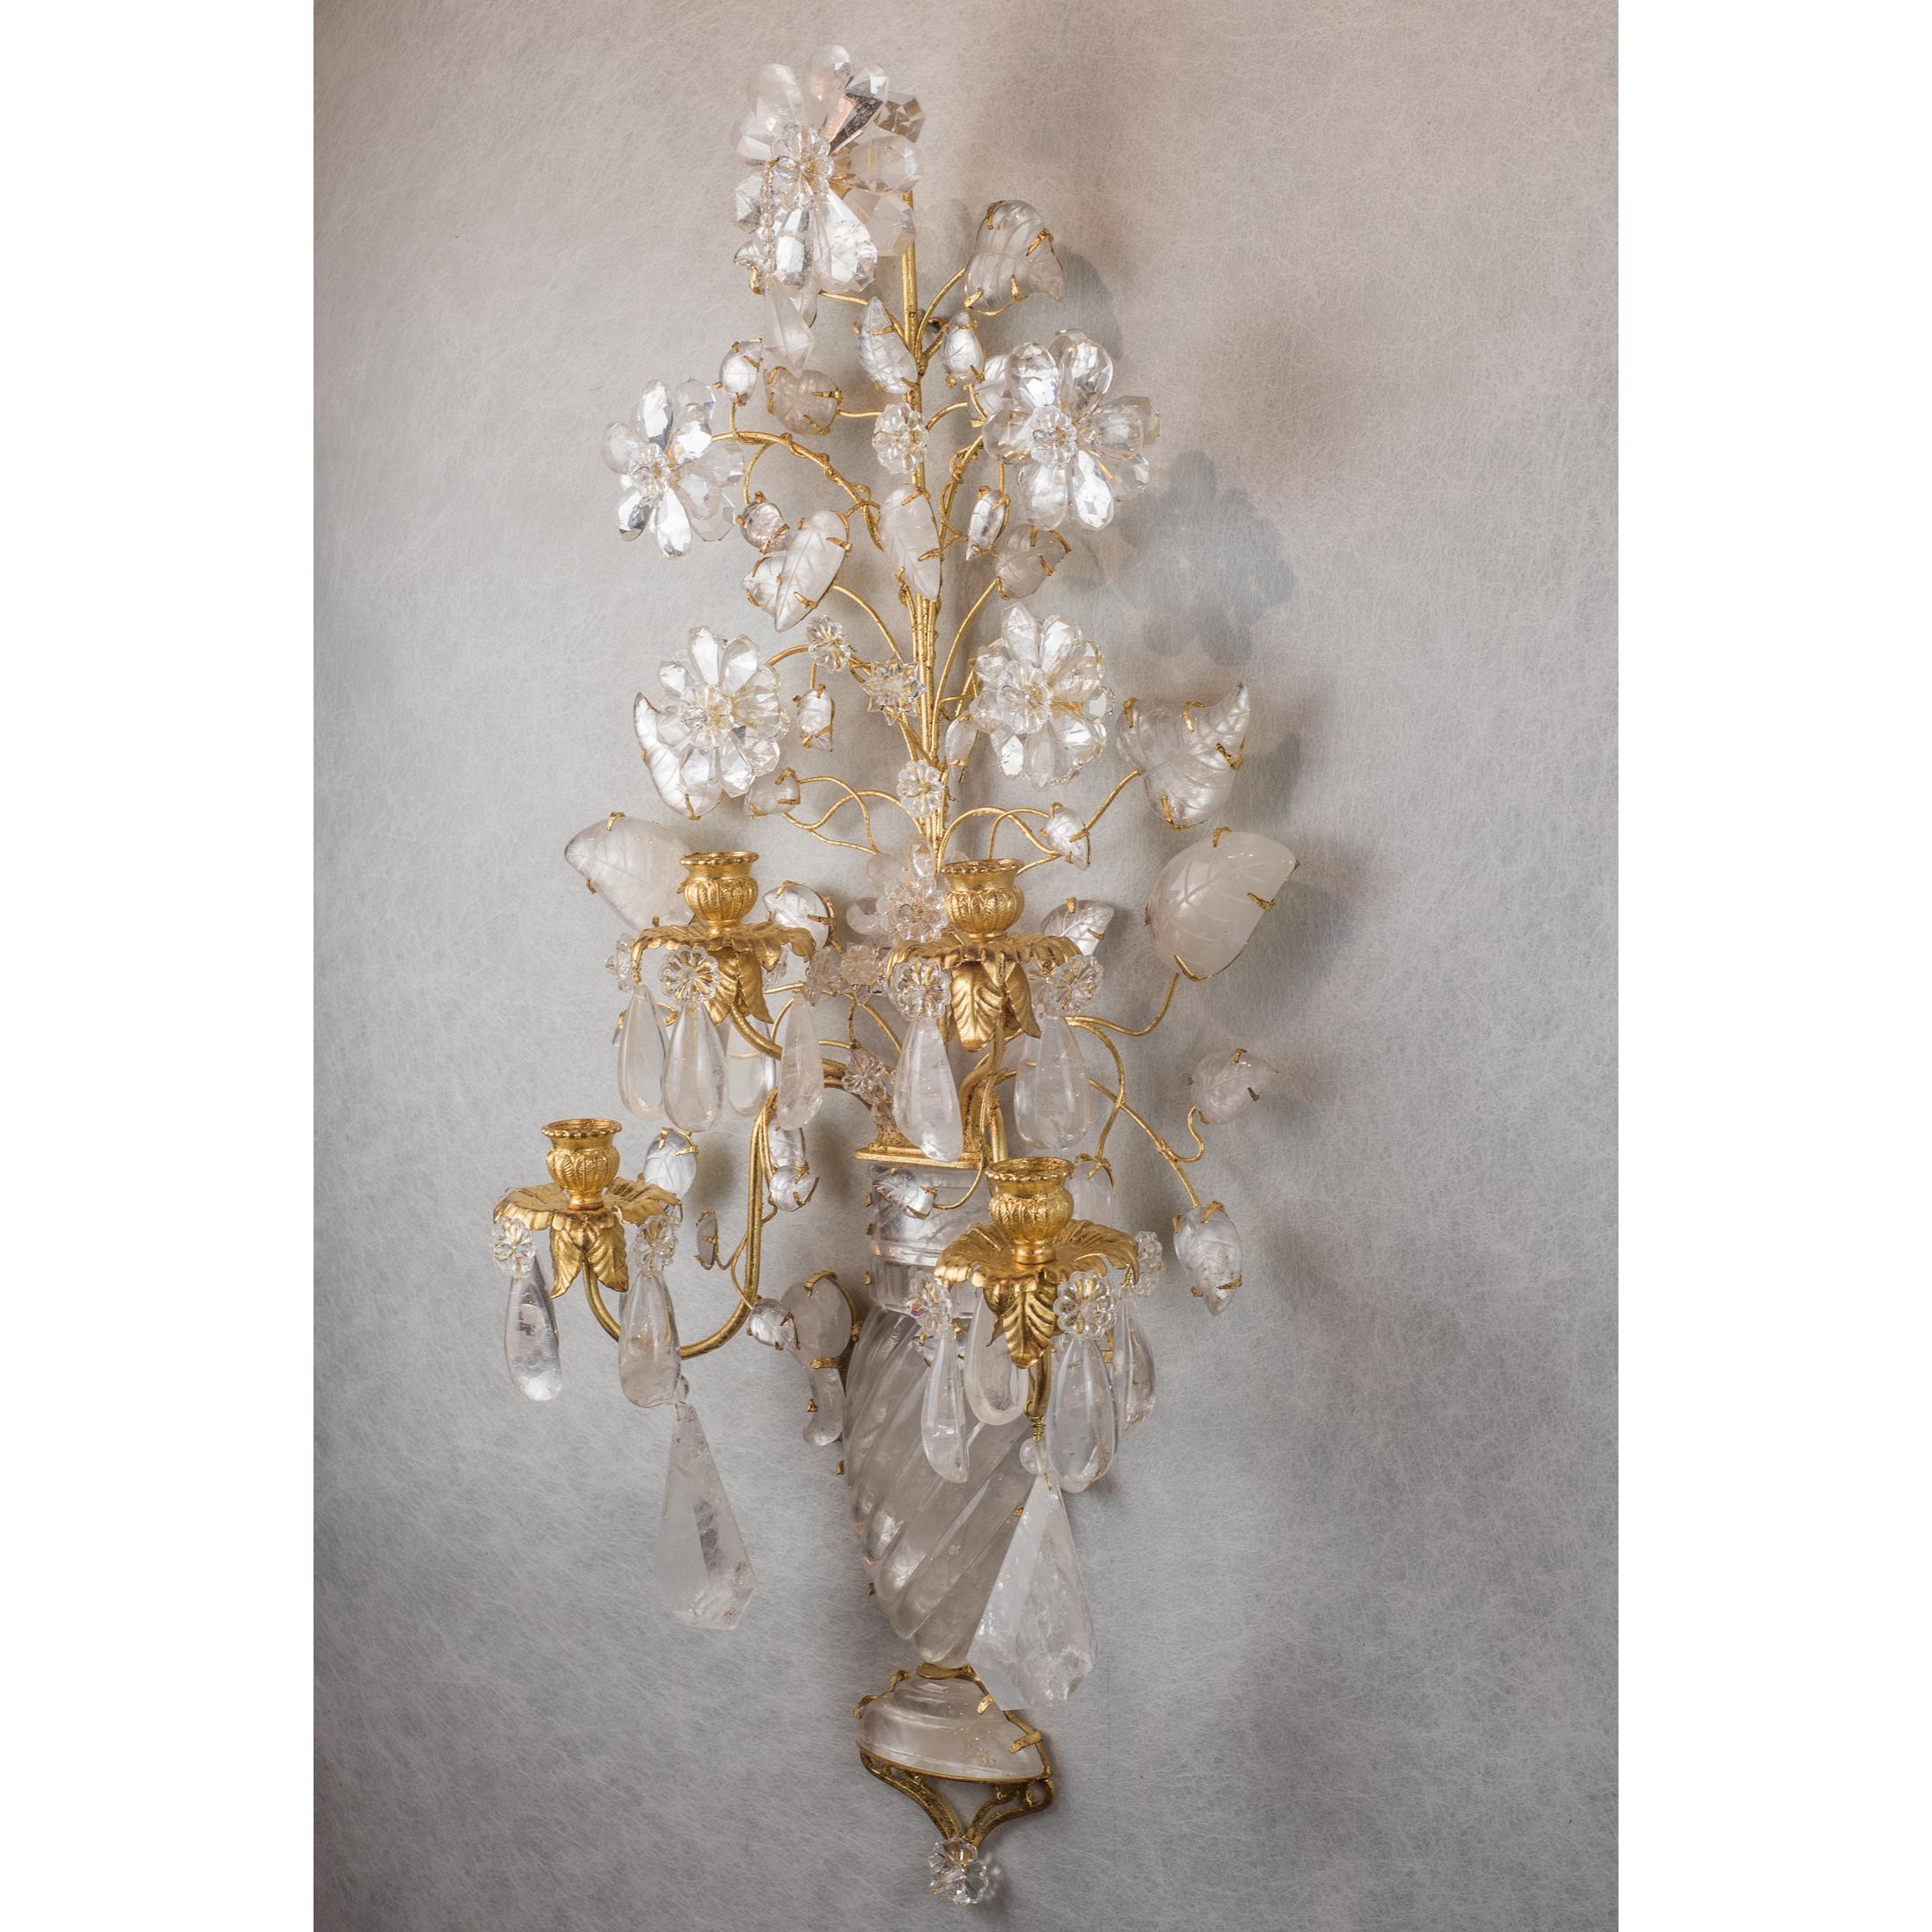 Elegant pair of French two-light gilt-metal rock crystal sconces in the form of a vase with flowers. All details are made of carved rock crystals, flowers with individual petals and leaves with individually carved stems. Light sockets are in the